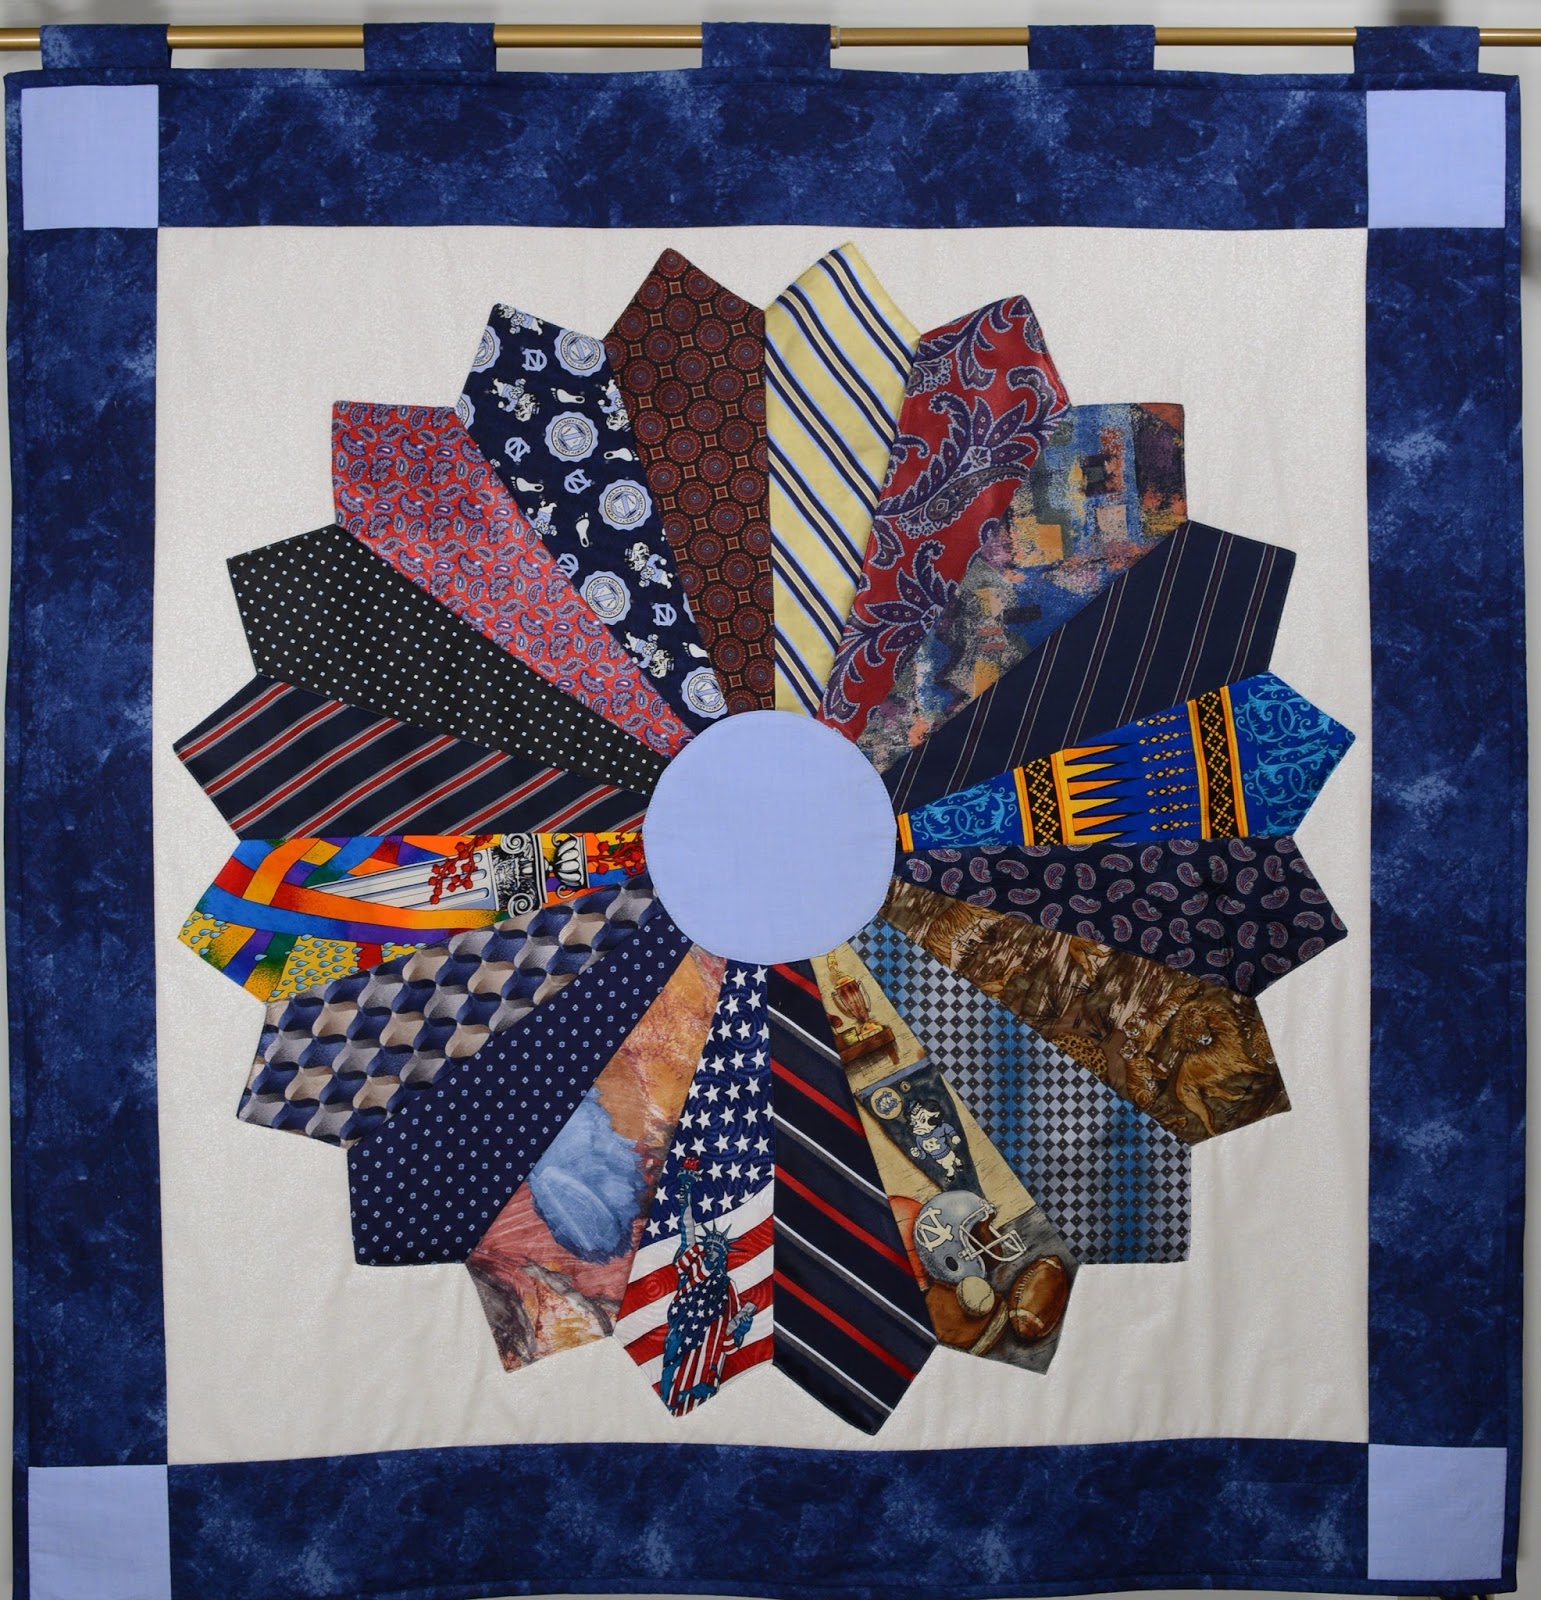 Debbie Lange Quilting: Upcycled Ties into Wallhanging - Carolina Blue